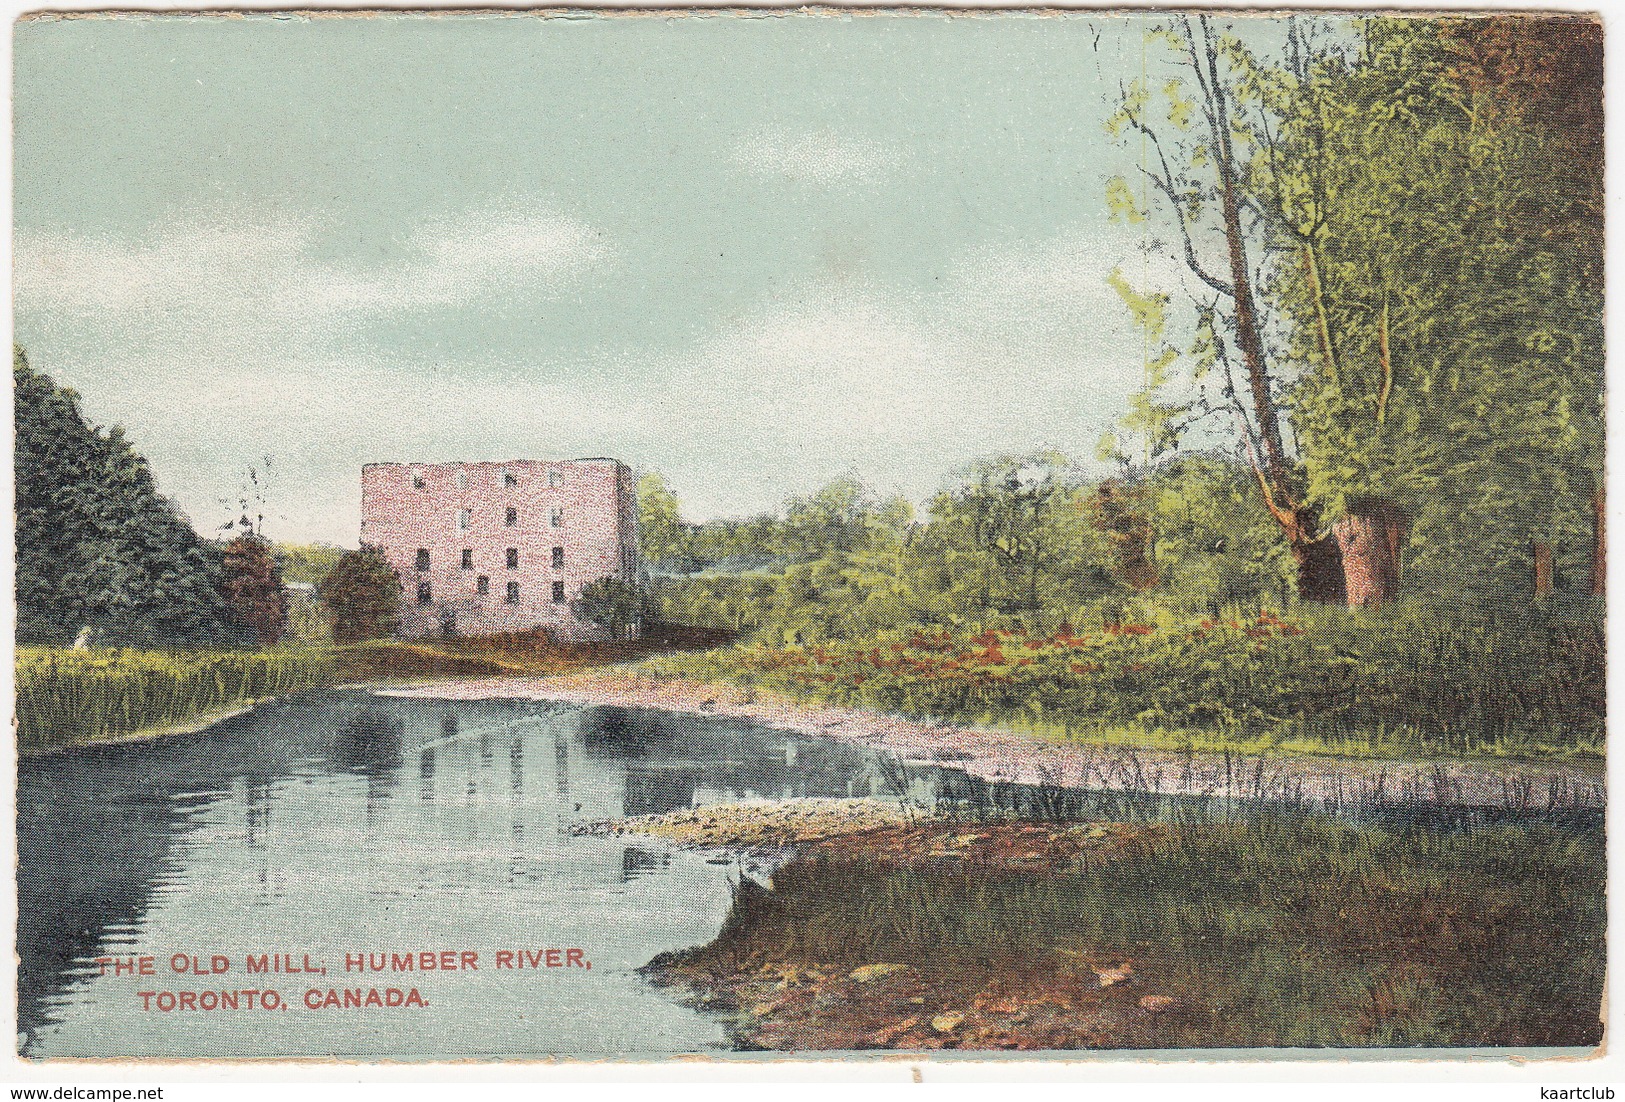 The Old Mill, Humber River, Toronto, Canada - Toronto